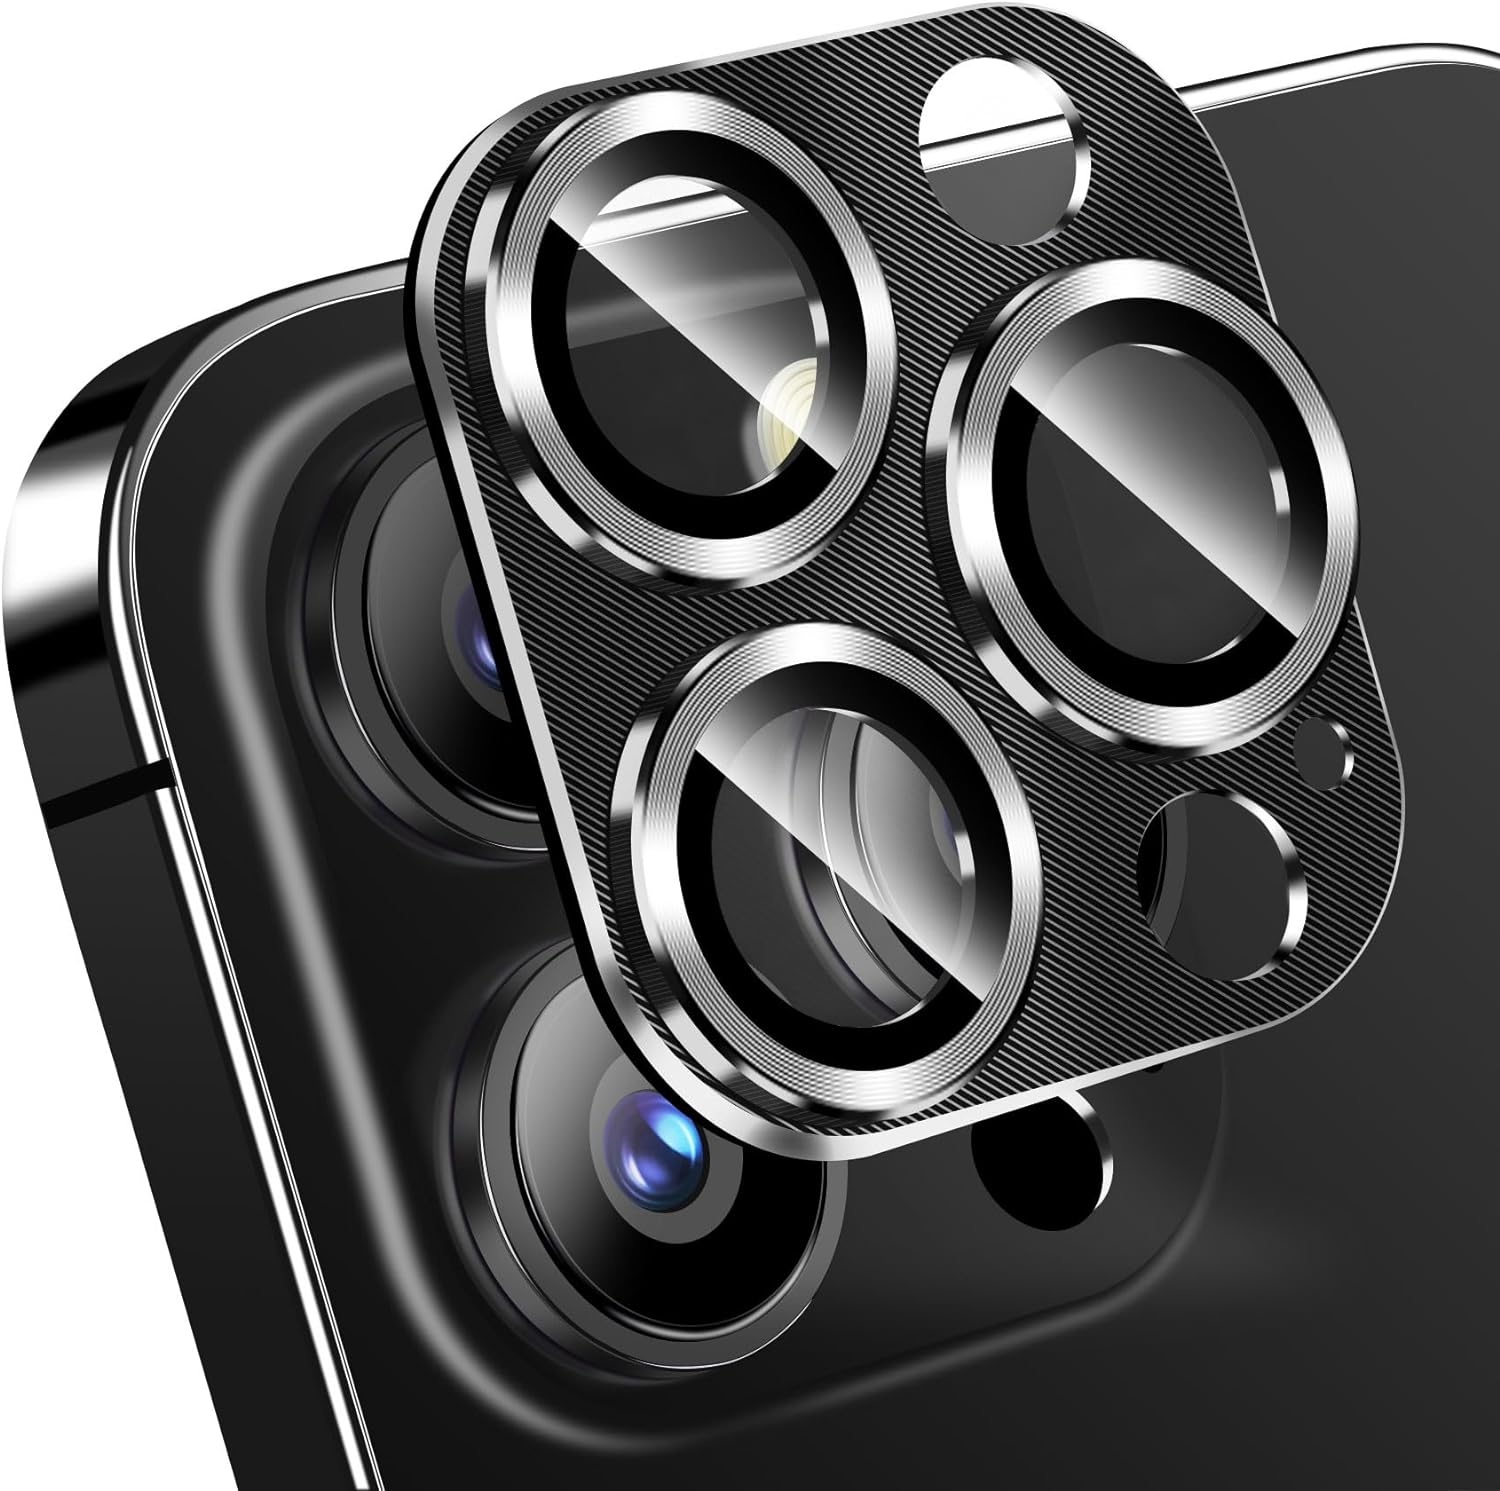 QHOHQ 3 Pack Camera Lens Protector for iPhone 15 Pro Max/iPhone 15 Pro, Zinc Alloy One Piece Camera Cover, [Updated Version], Full Coverage Protection, Ultra HD, Shatterproof - Black